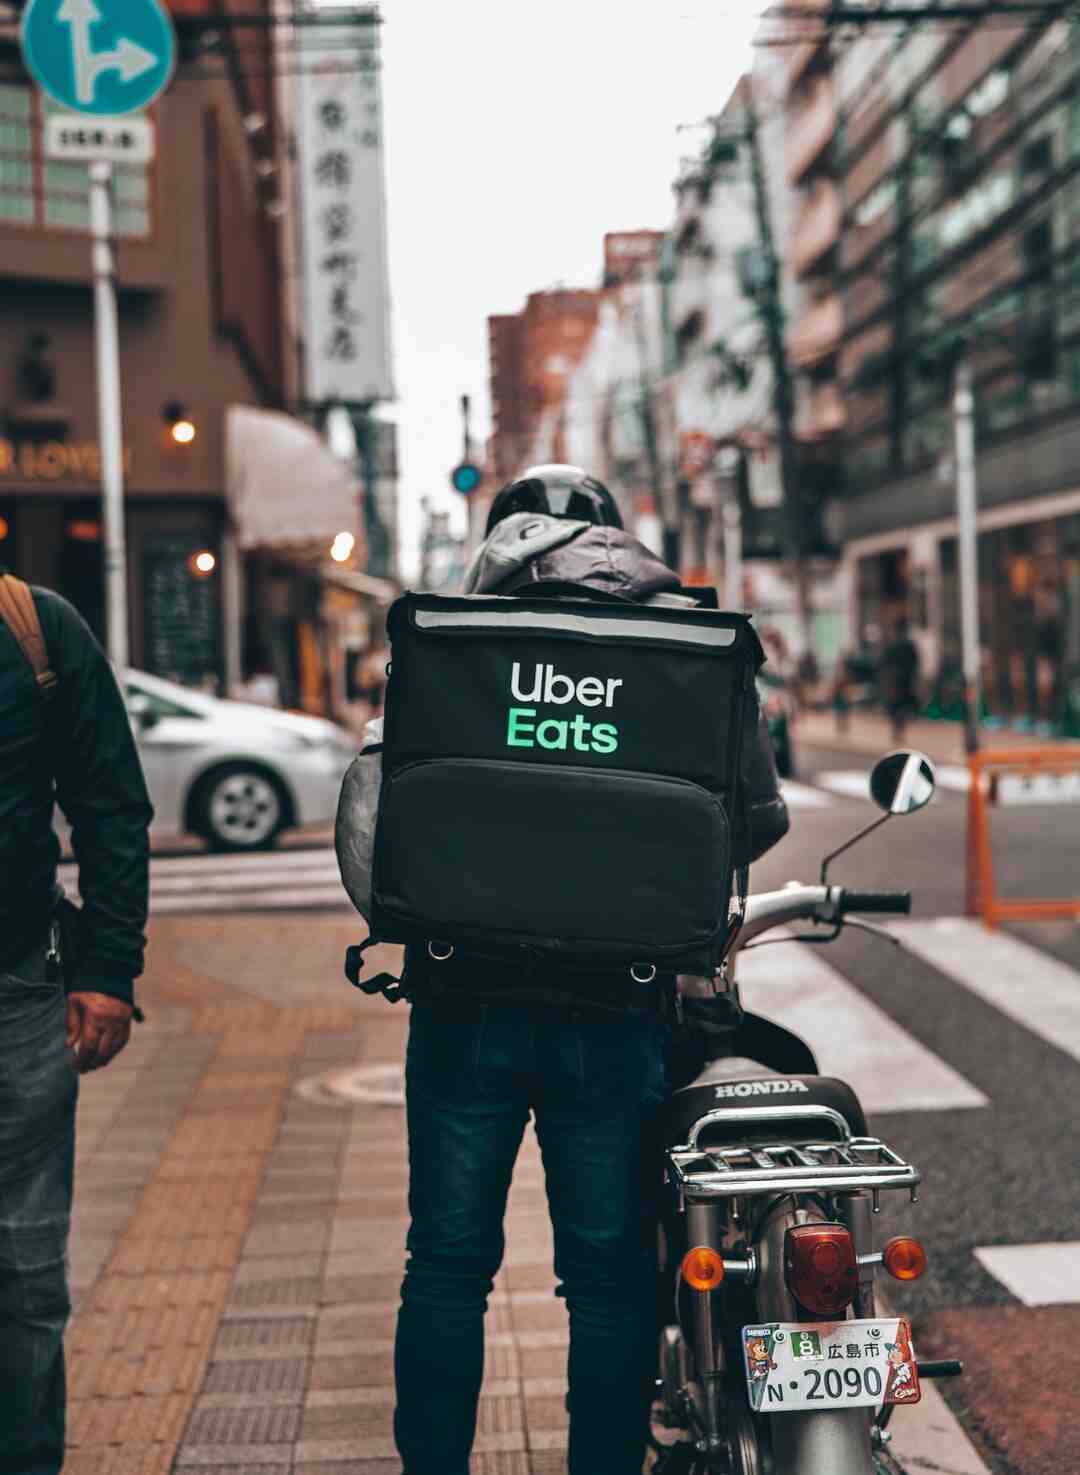 How do I order an Über for 3 people?